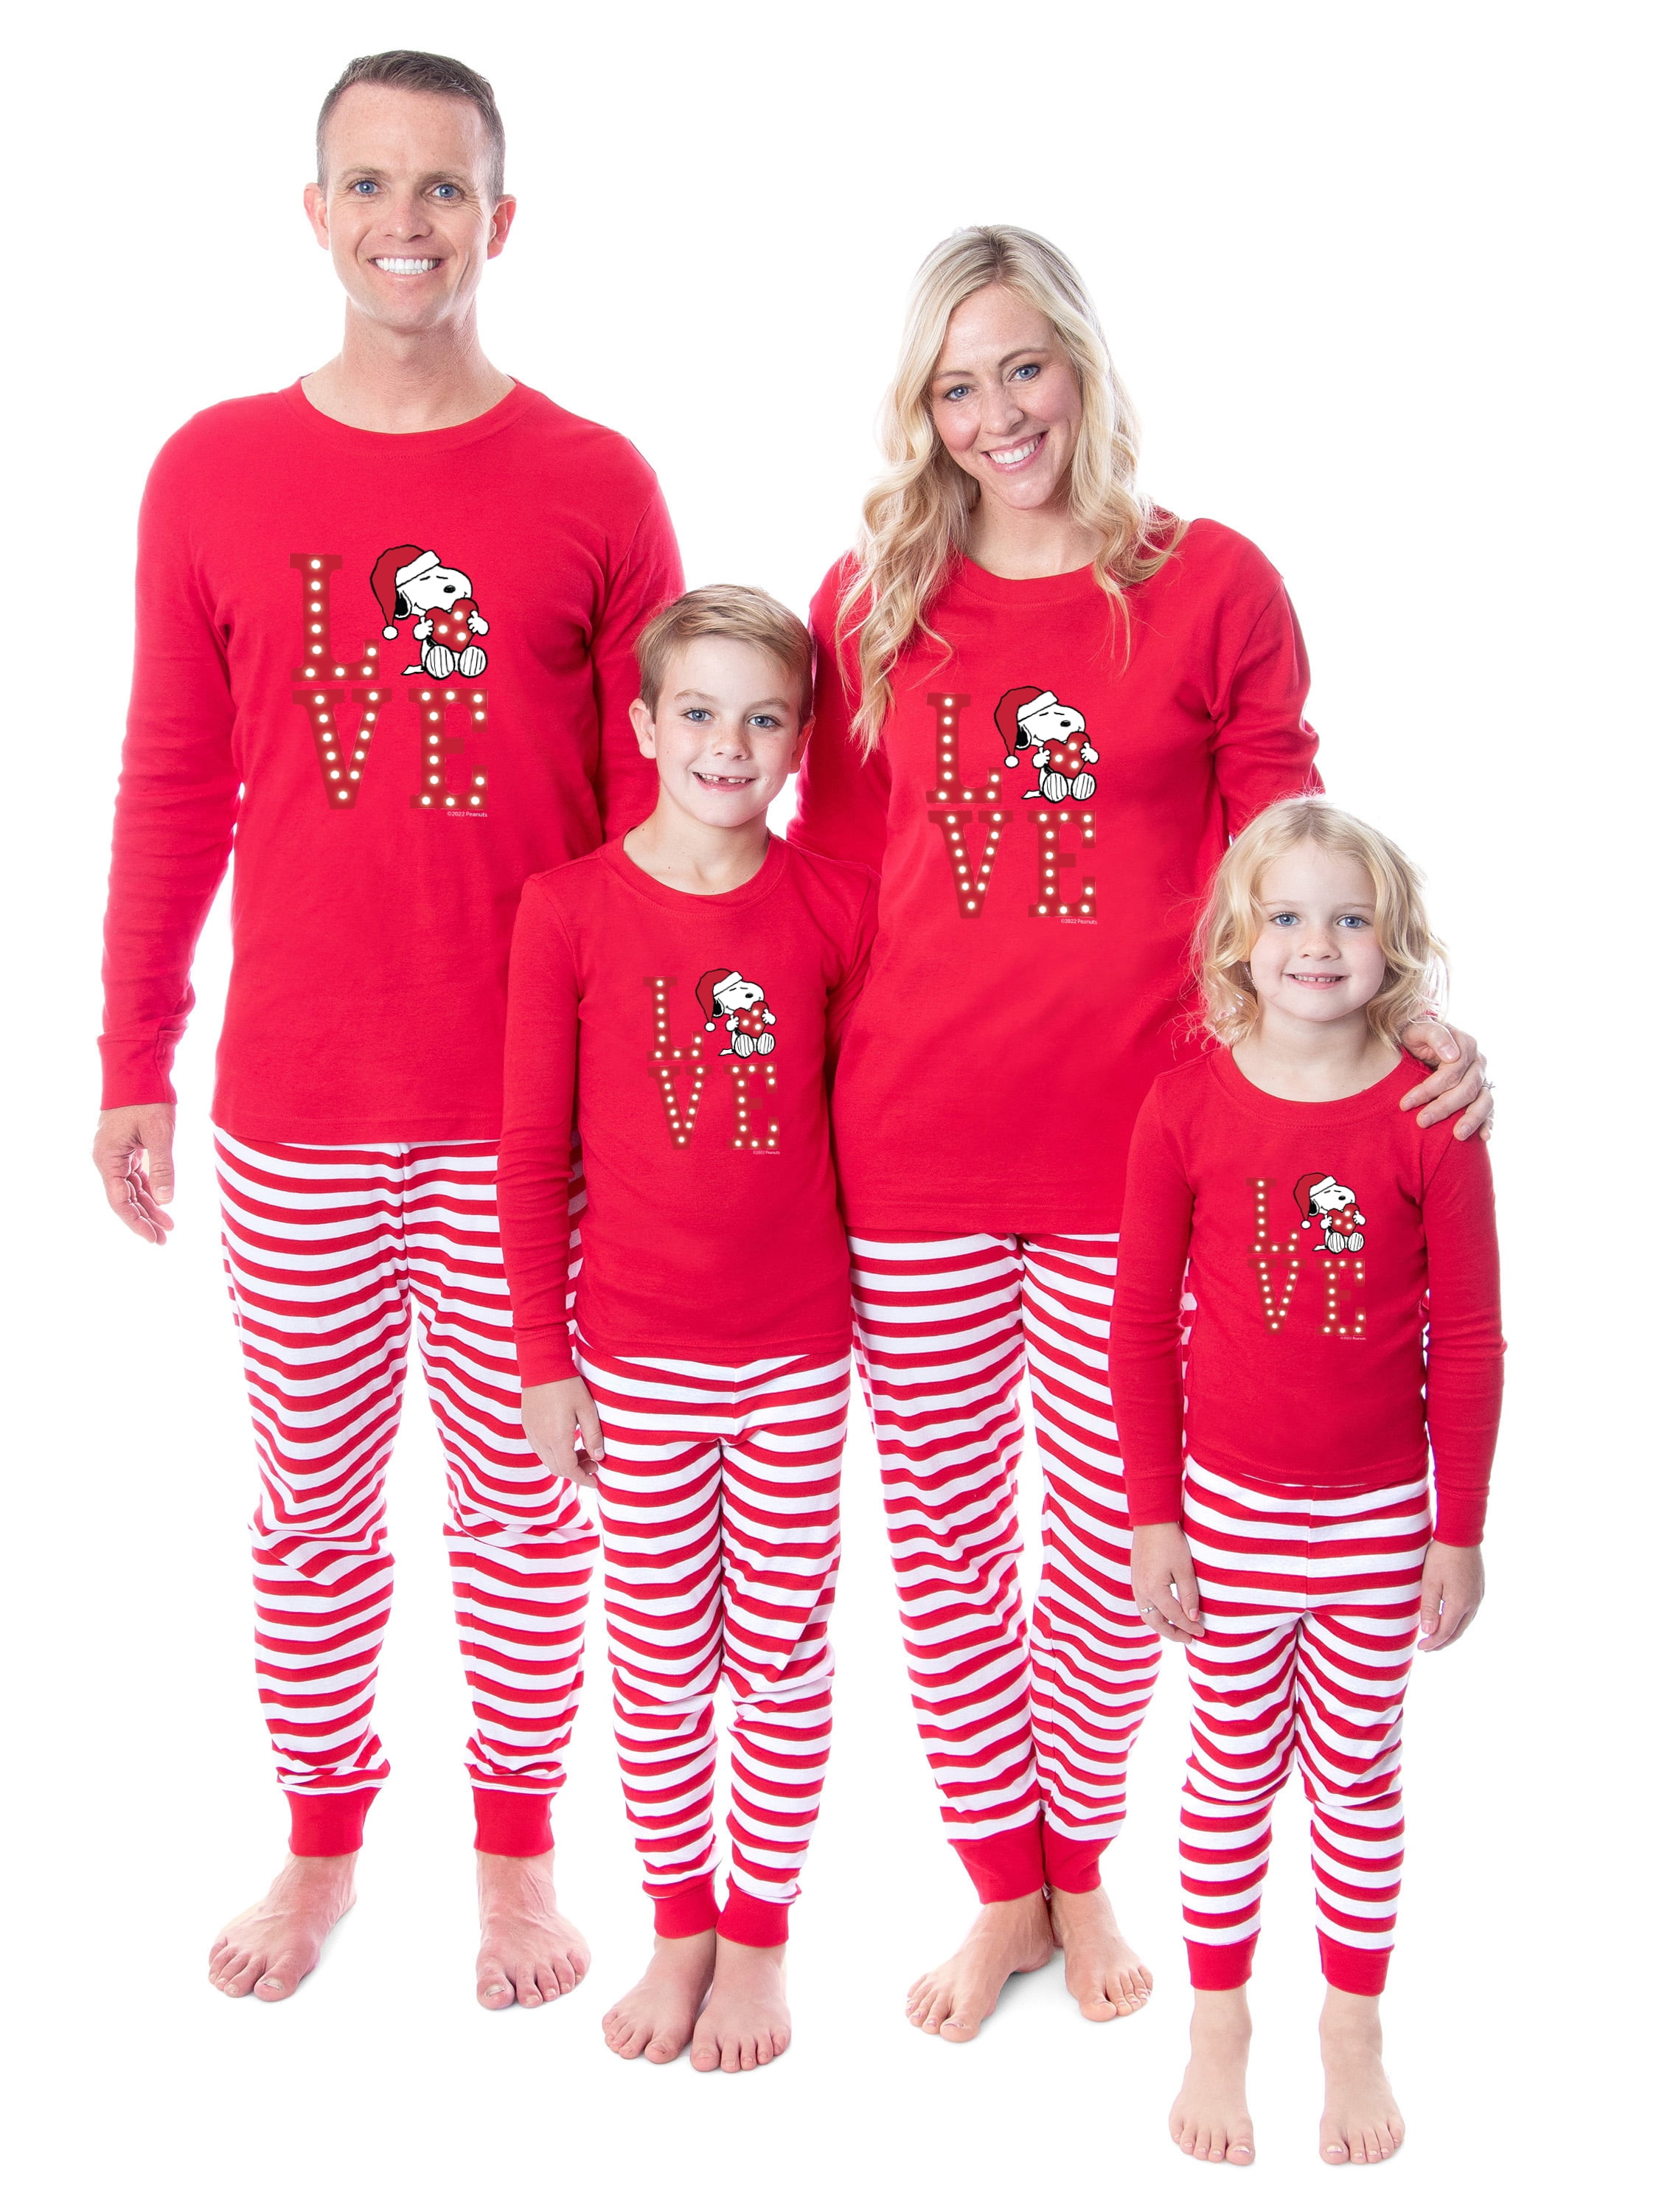 Best Friends TV Show Mix Snoopy Holiday Xmas Family Pajamas Sets Matching  With Dog - The Wholesale T-Shirts By VinCo